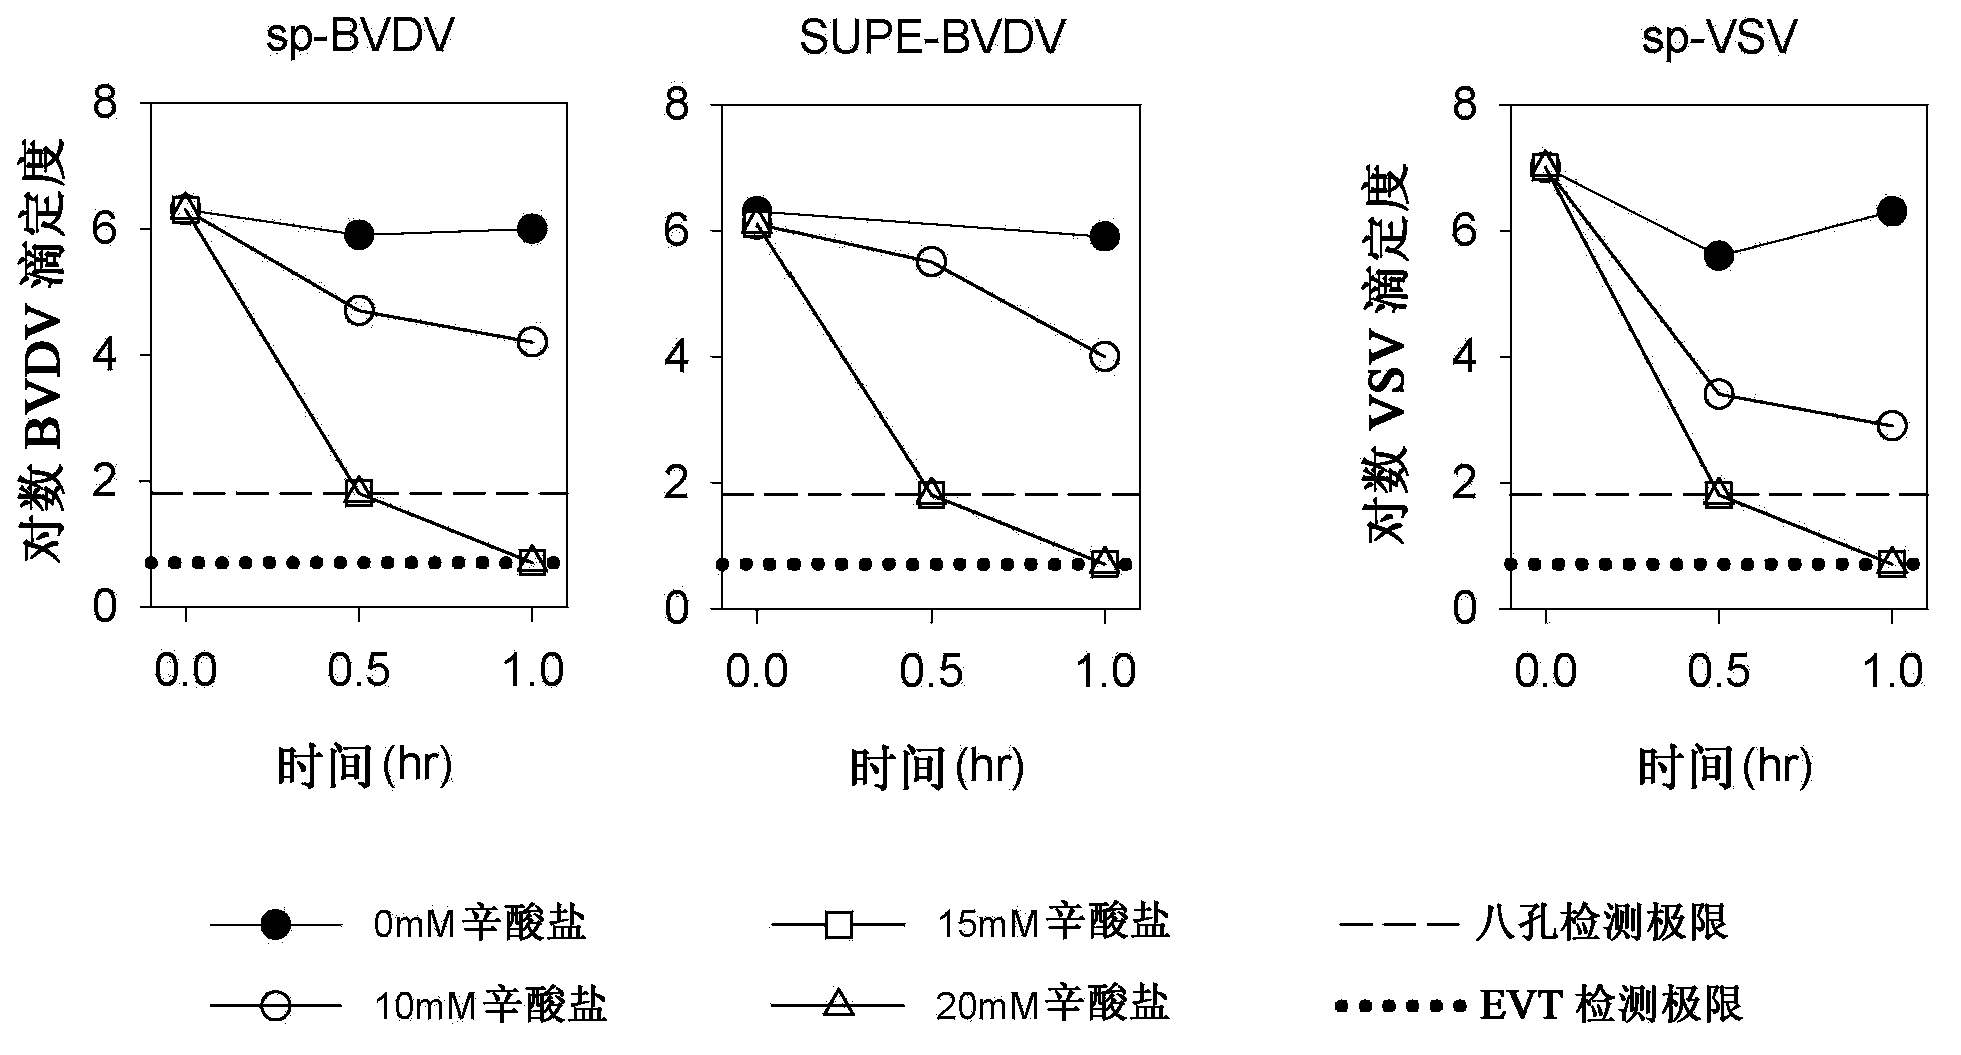 Method of preparing albumin from a solution comprising albumin and a method for inactivating viruses using caprylate in solutions containing albumin